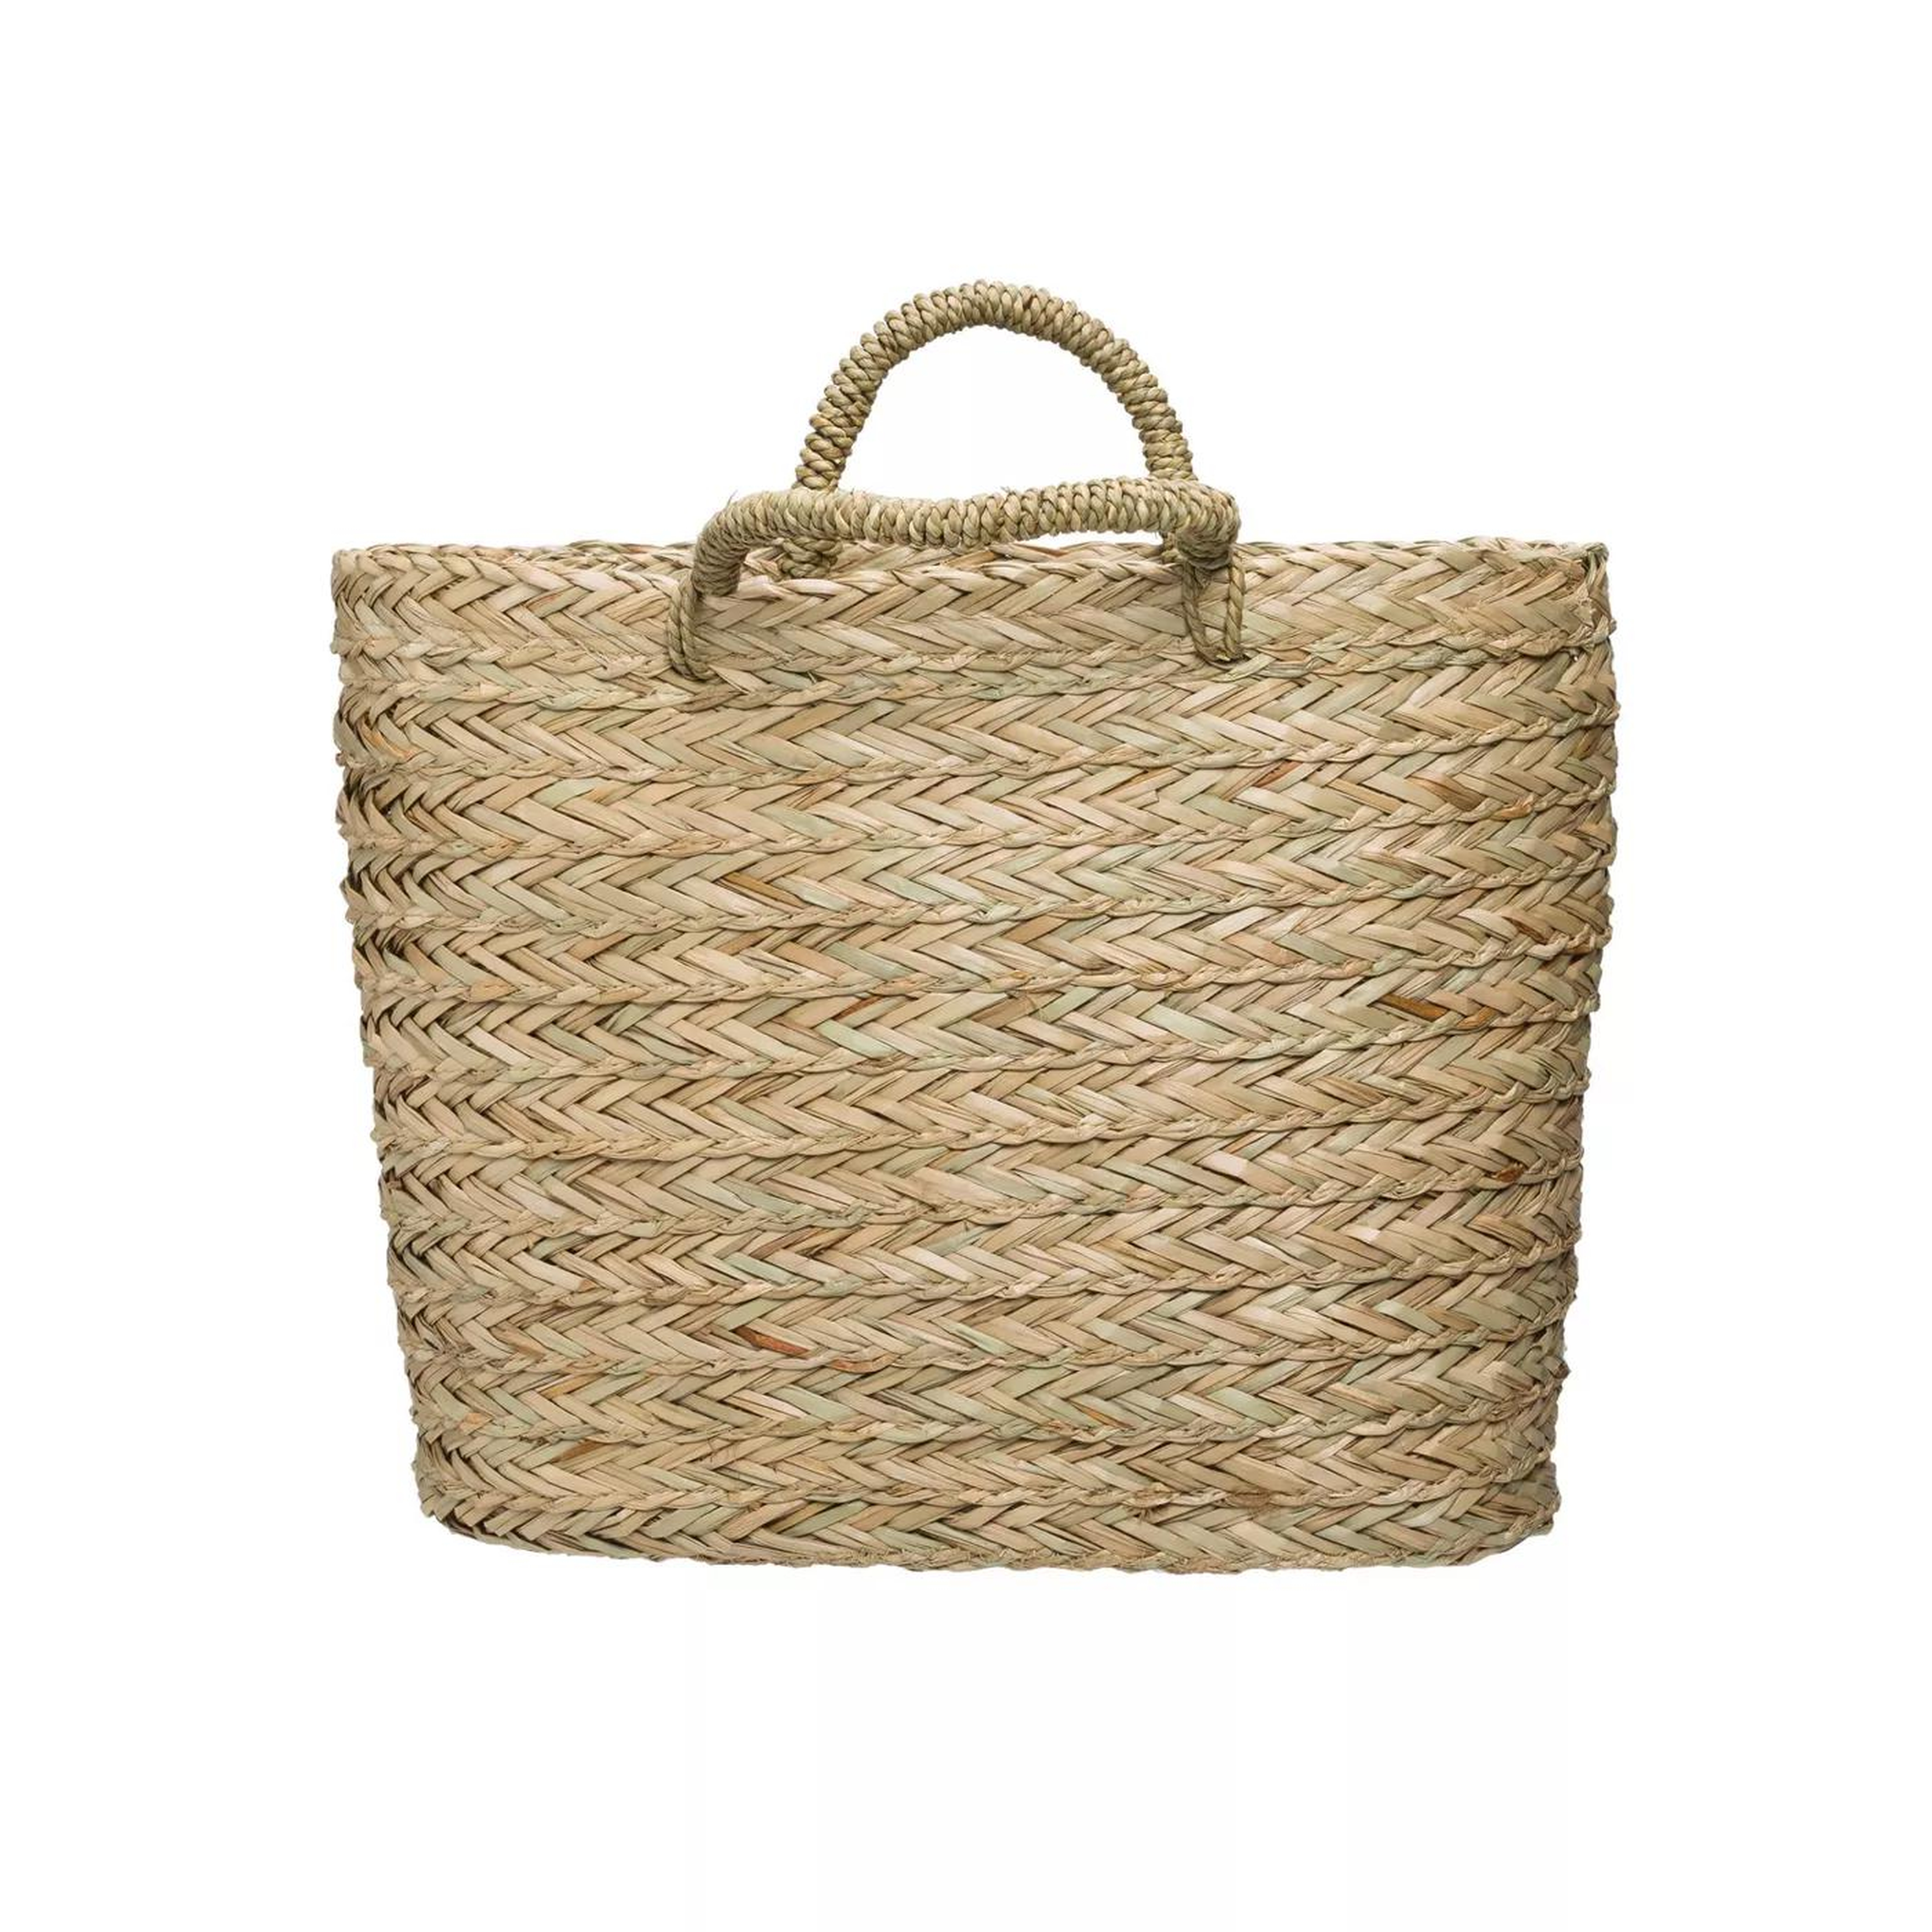 Handwoven Beige Seagrass Wall Baskets (Set of 2 Sizes) - Nomad Home